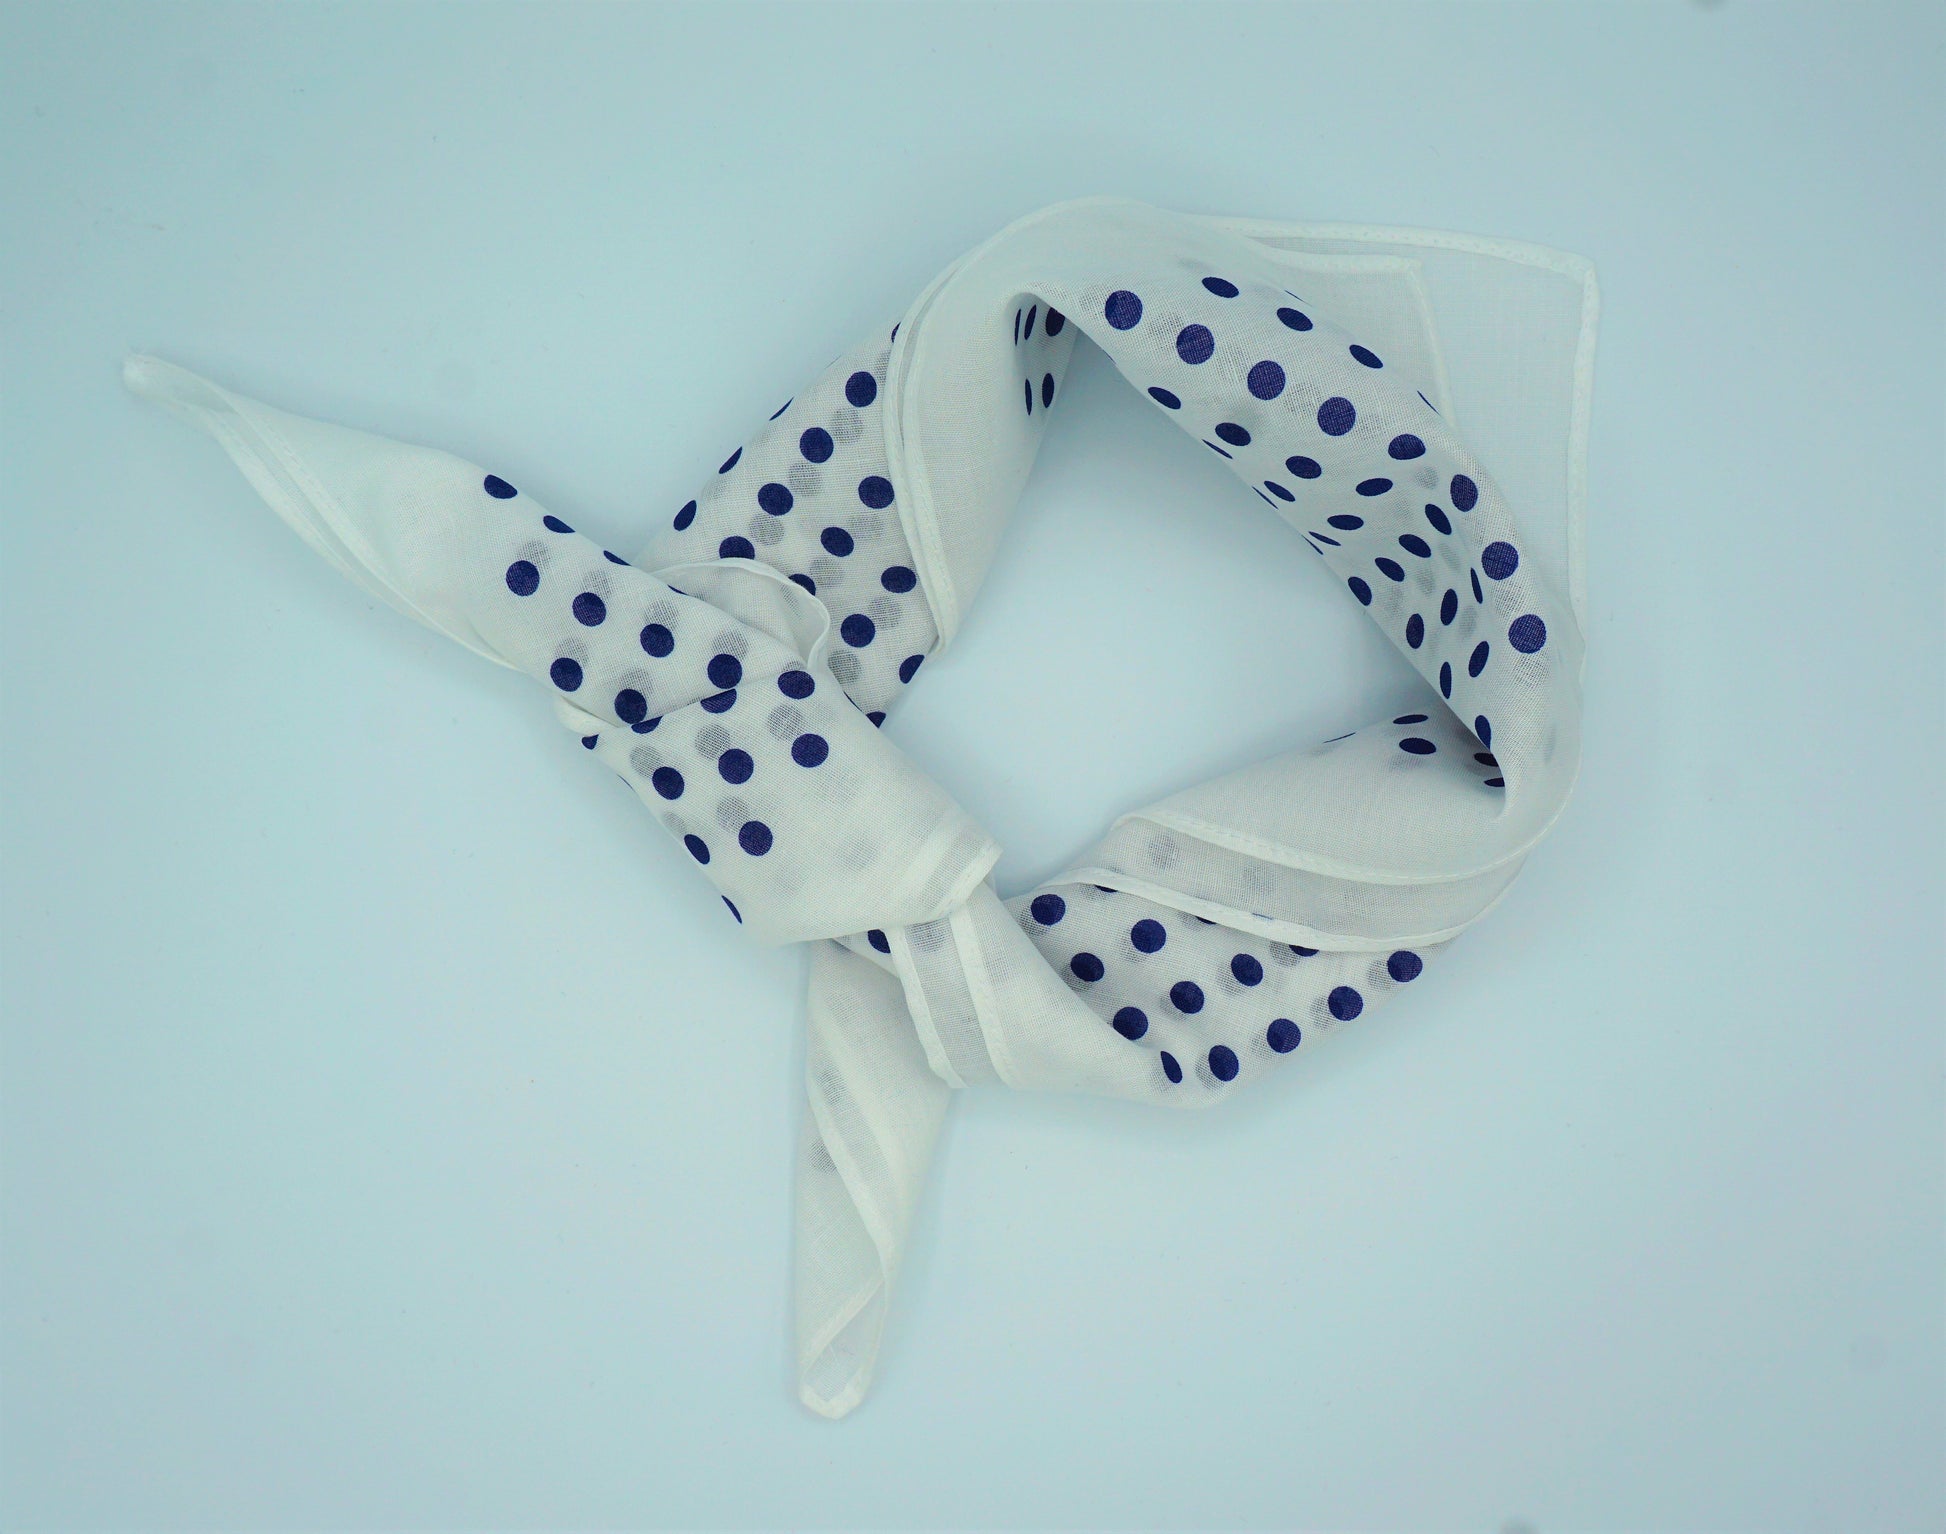 100% soft, durable cotton handkerchief-bandana by Regent, made in Italy to the finest quality and highest degree.